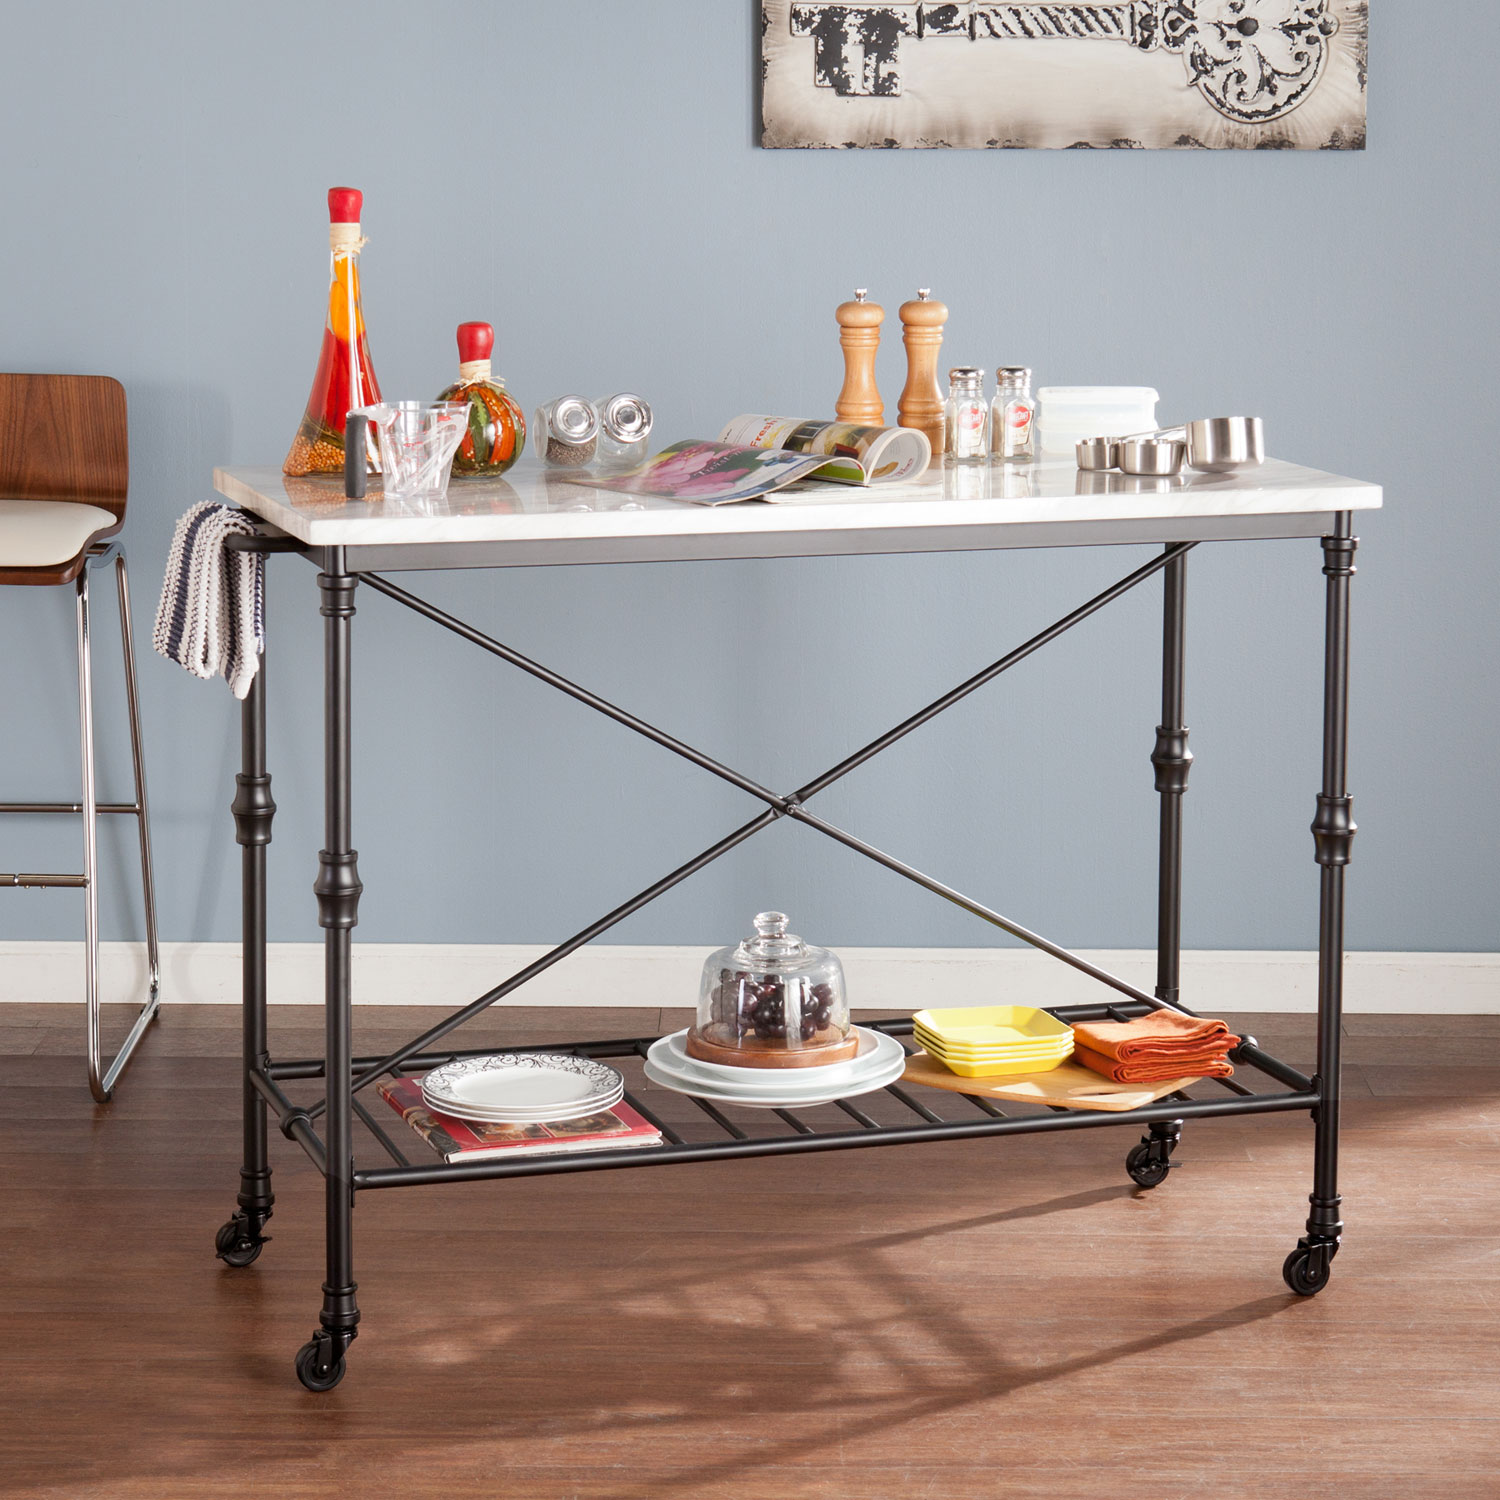 Kitchen Islands & Carts Category